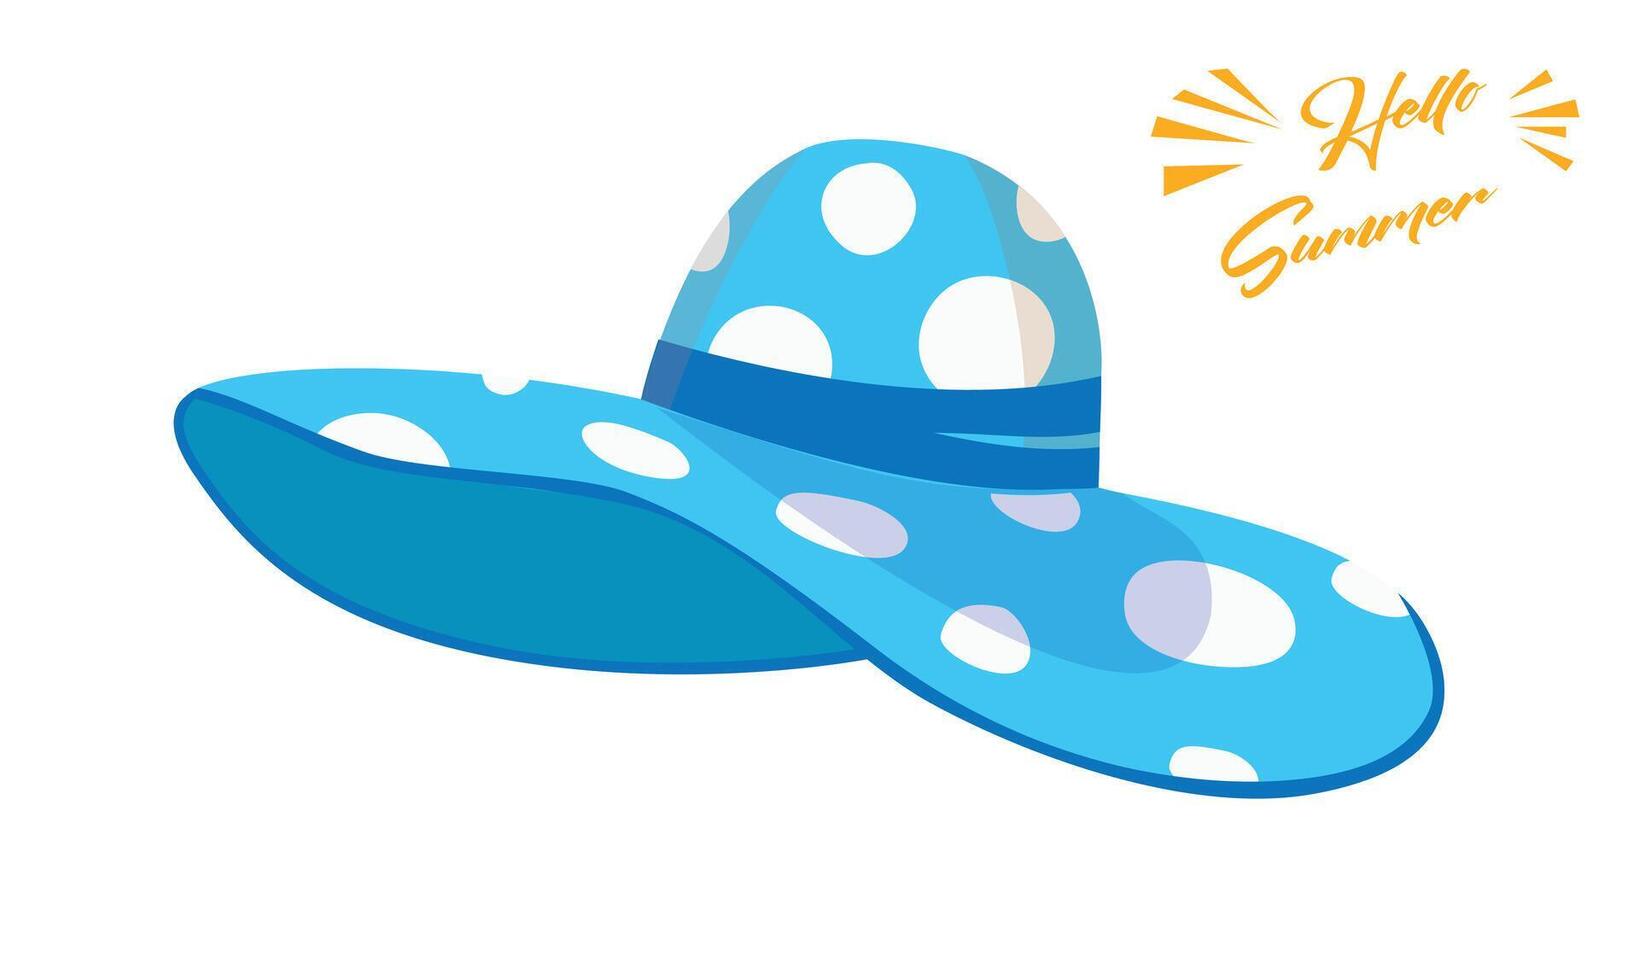 Summer hat vector illustration. Large brim floppy sun hat clipart. Summer vacation items. Women accessory. Beach vacation. Wide headgear hat. Flat vector in cartoon style isolated on white background.